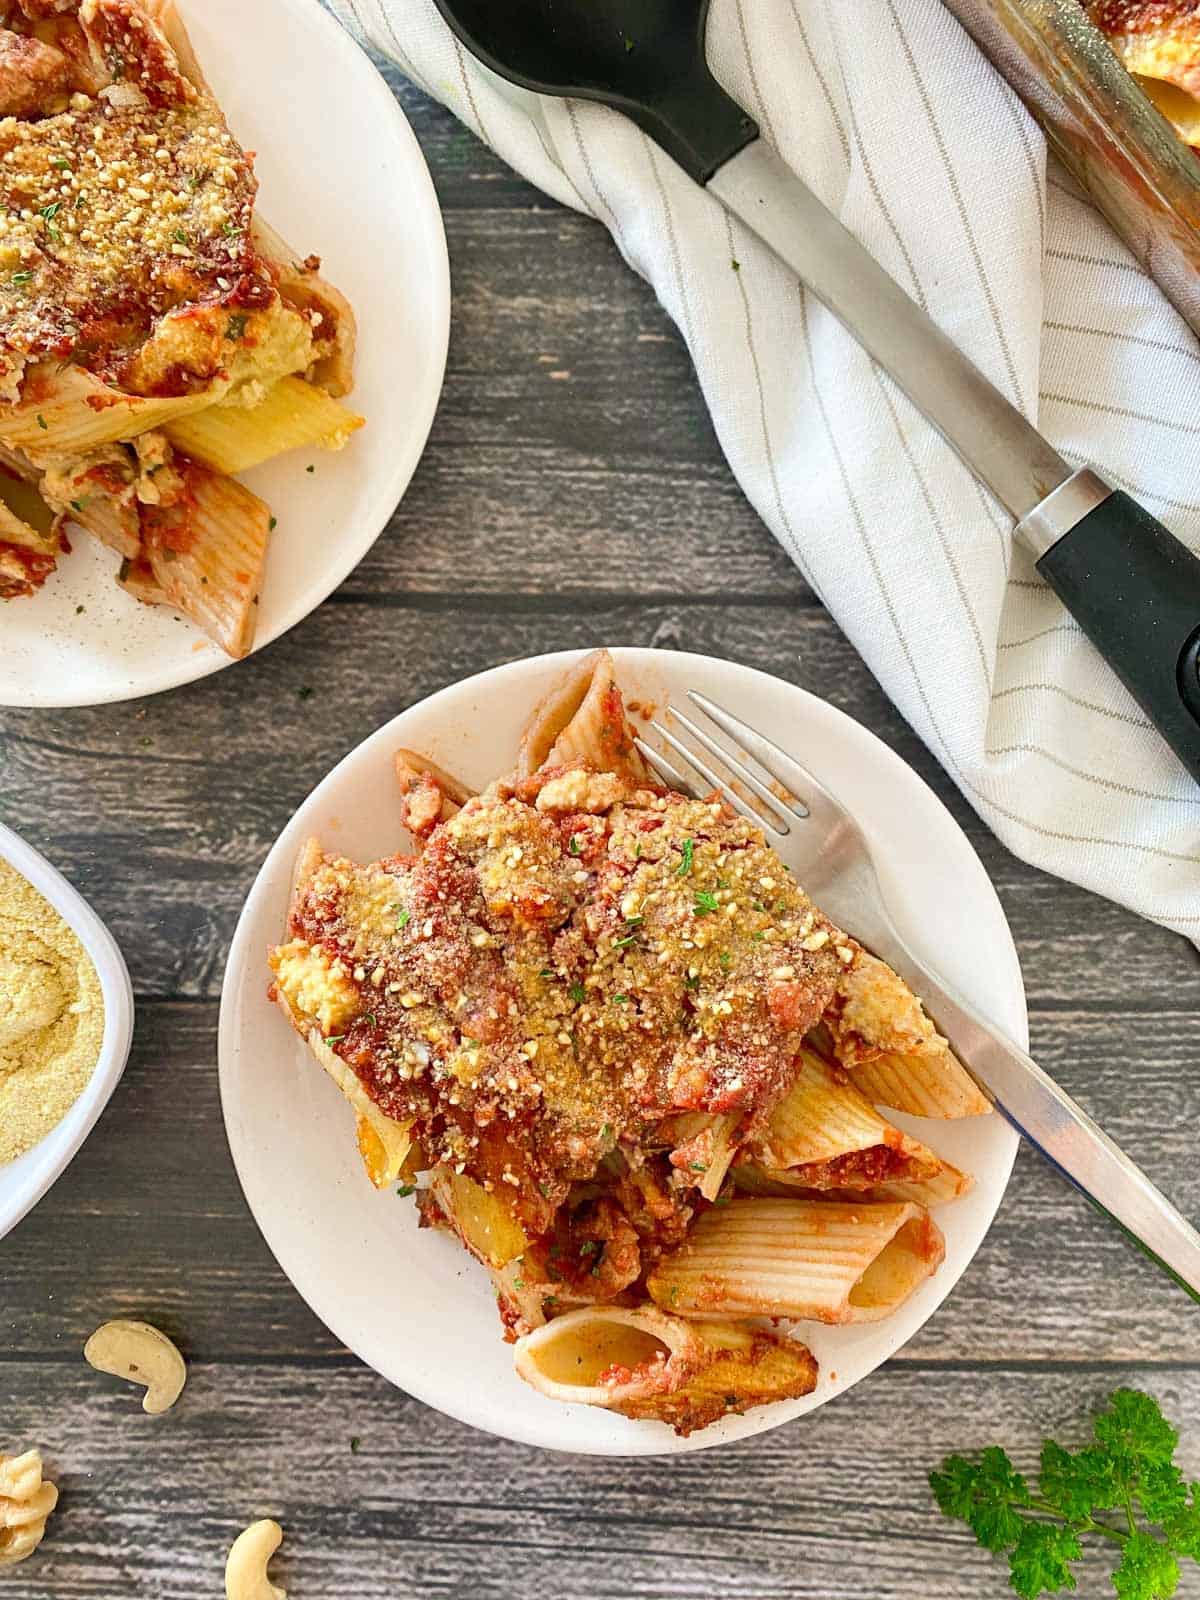 plate of baked pasta dish with fork inside.